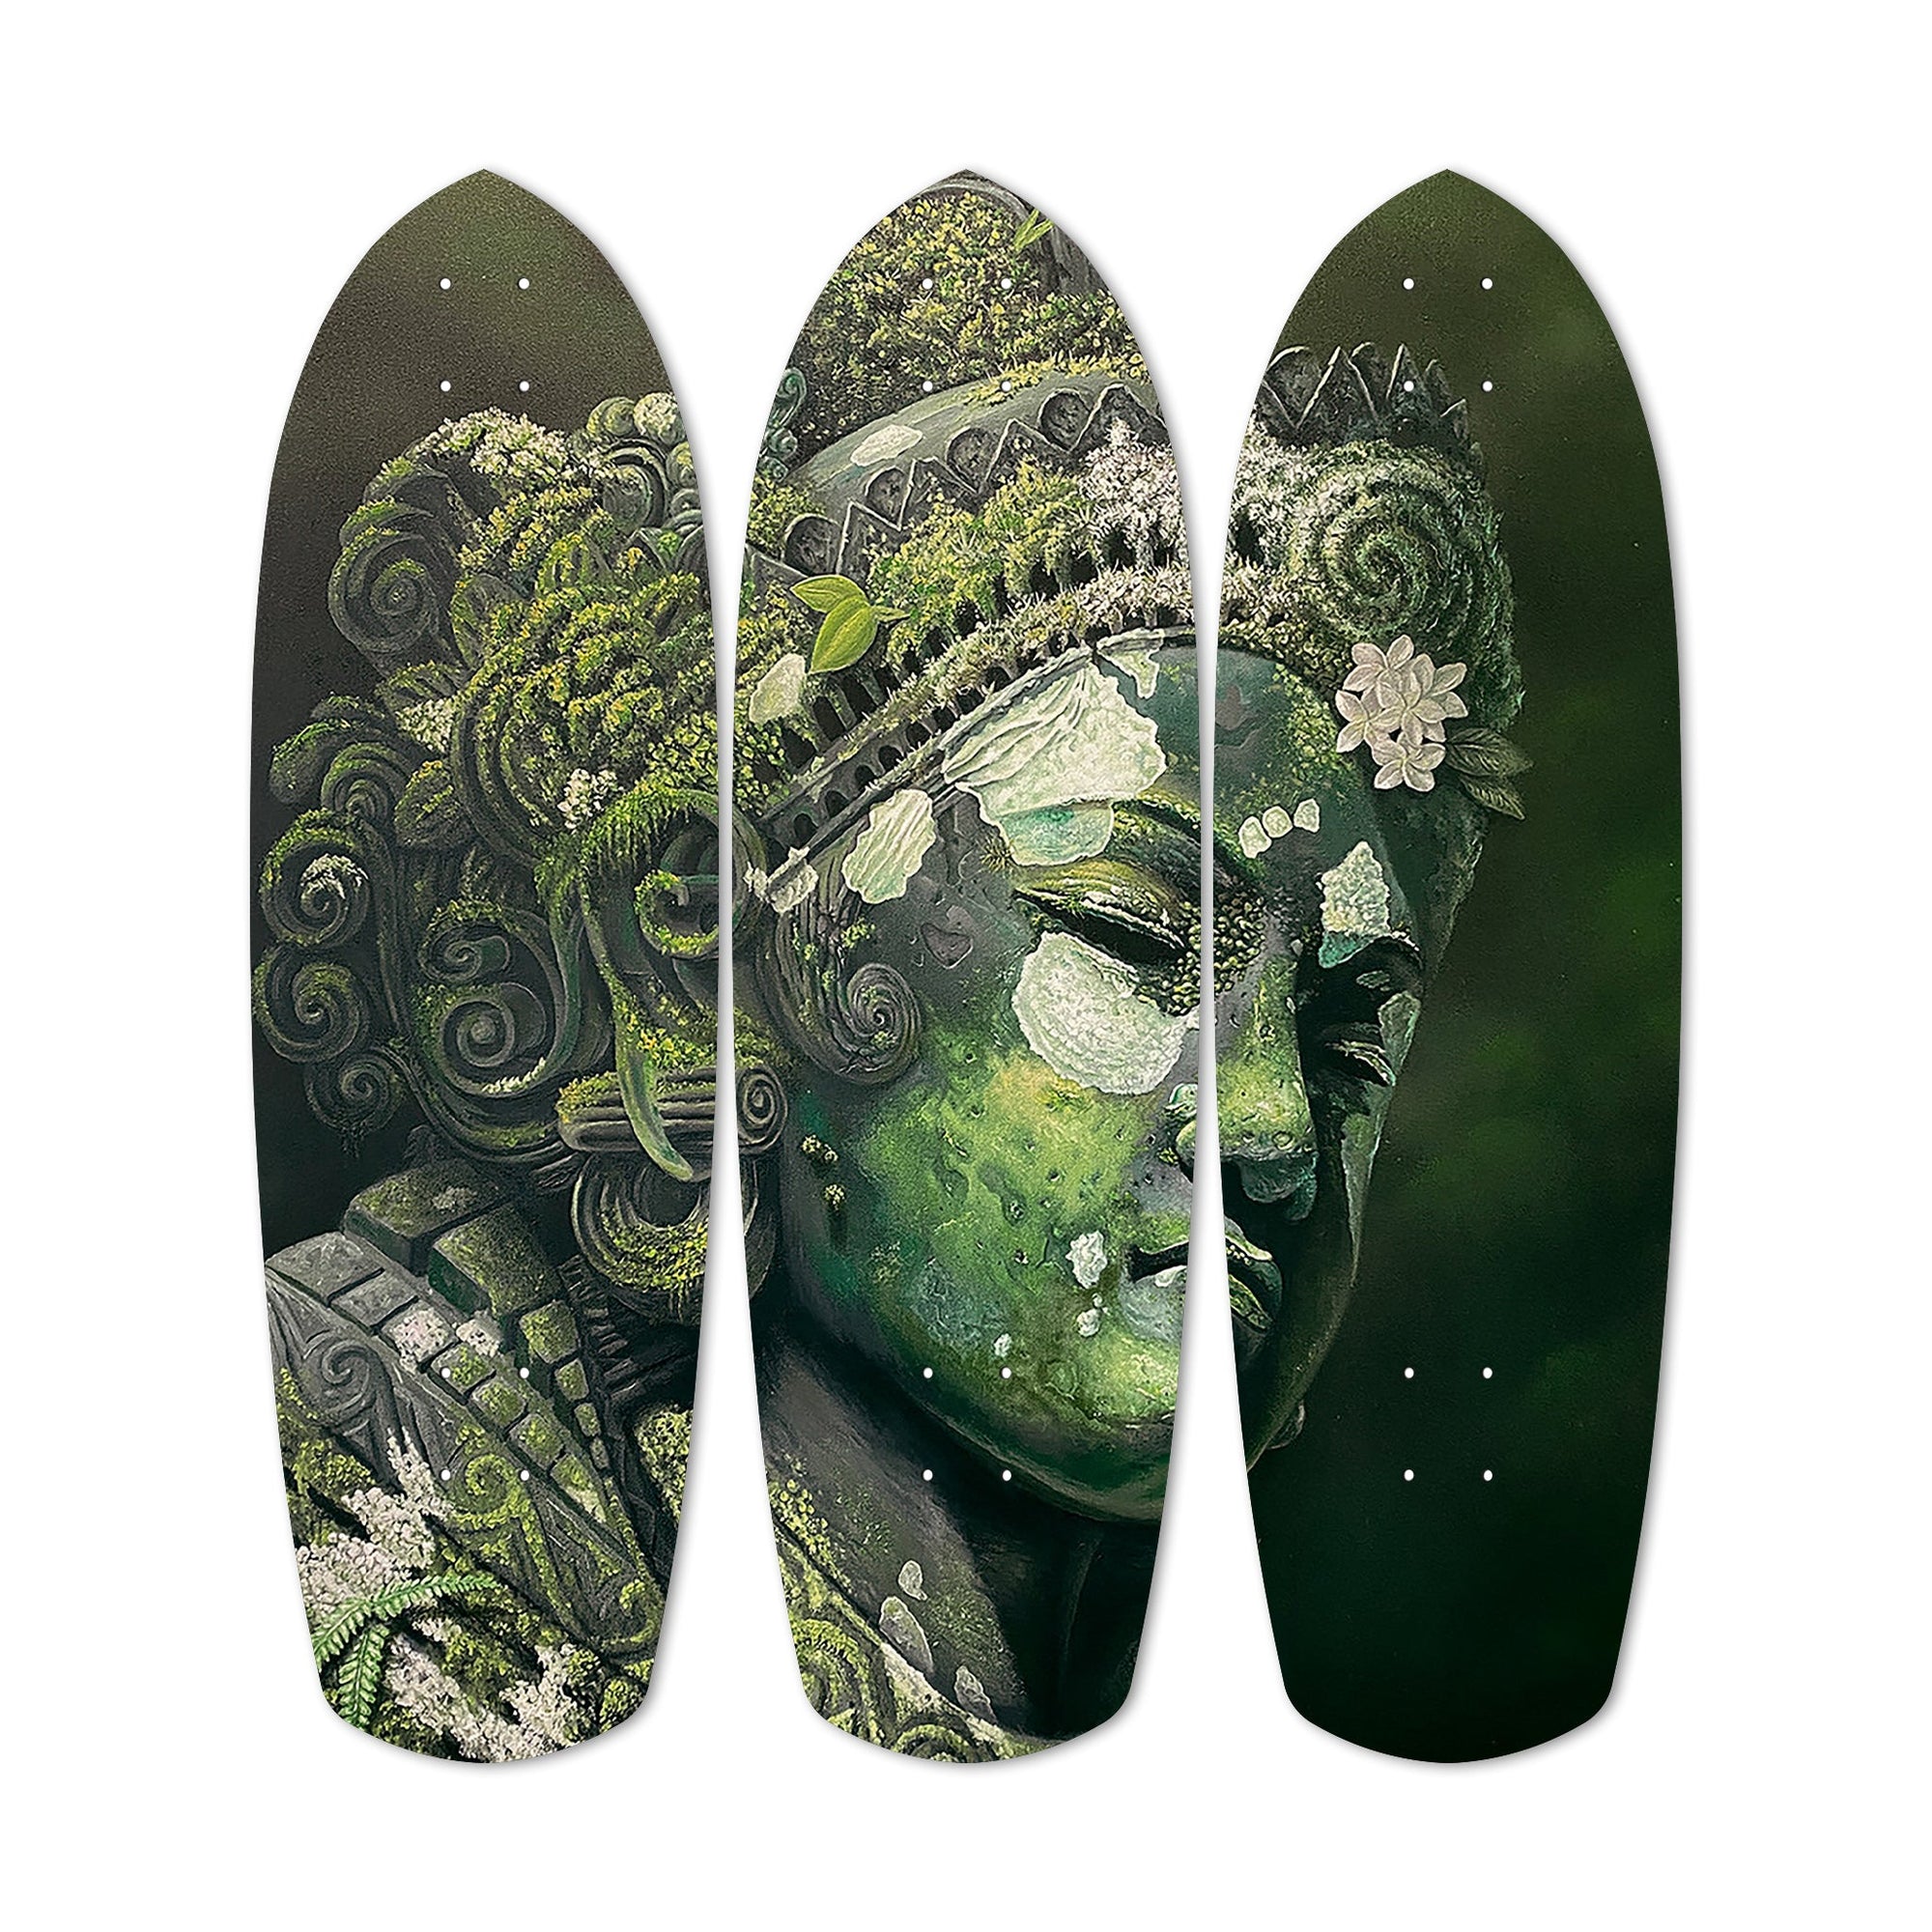 Lord Shiva Carver 840 art skateboard deck frontside. Unicat and original by Alex Hohl